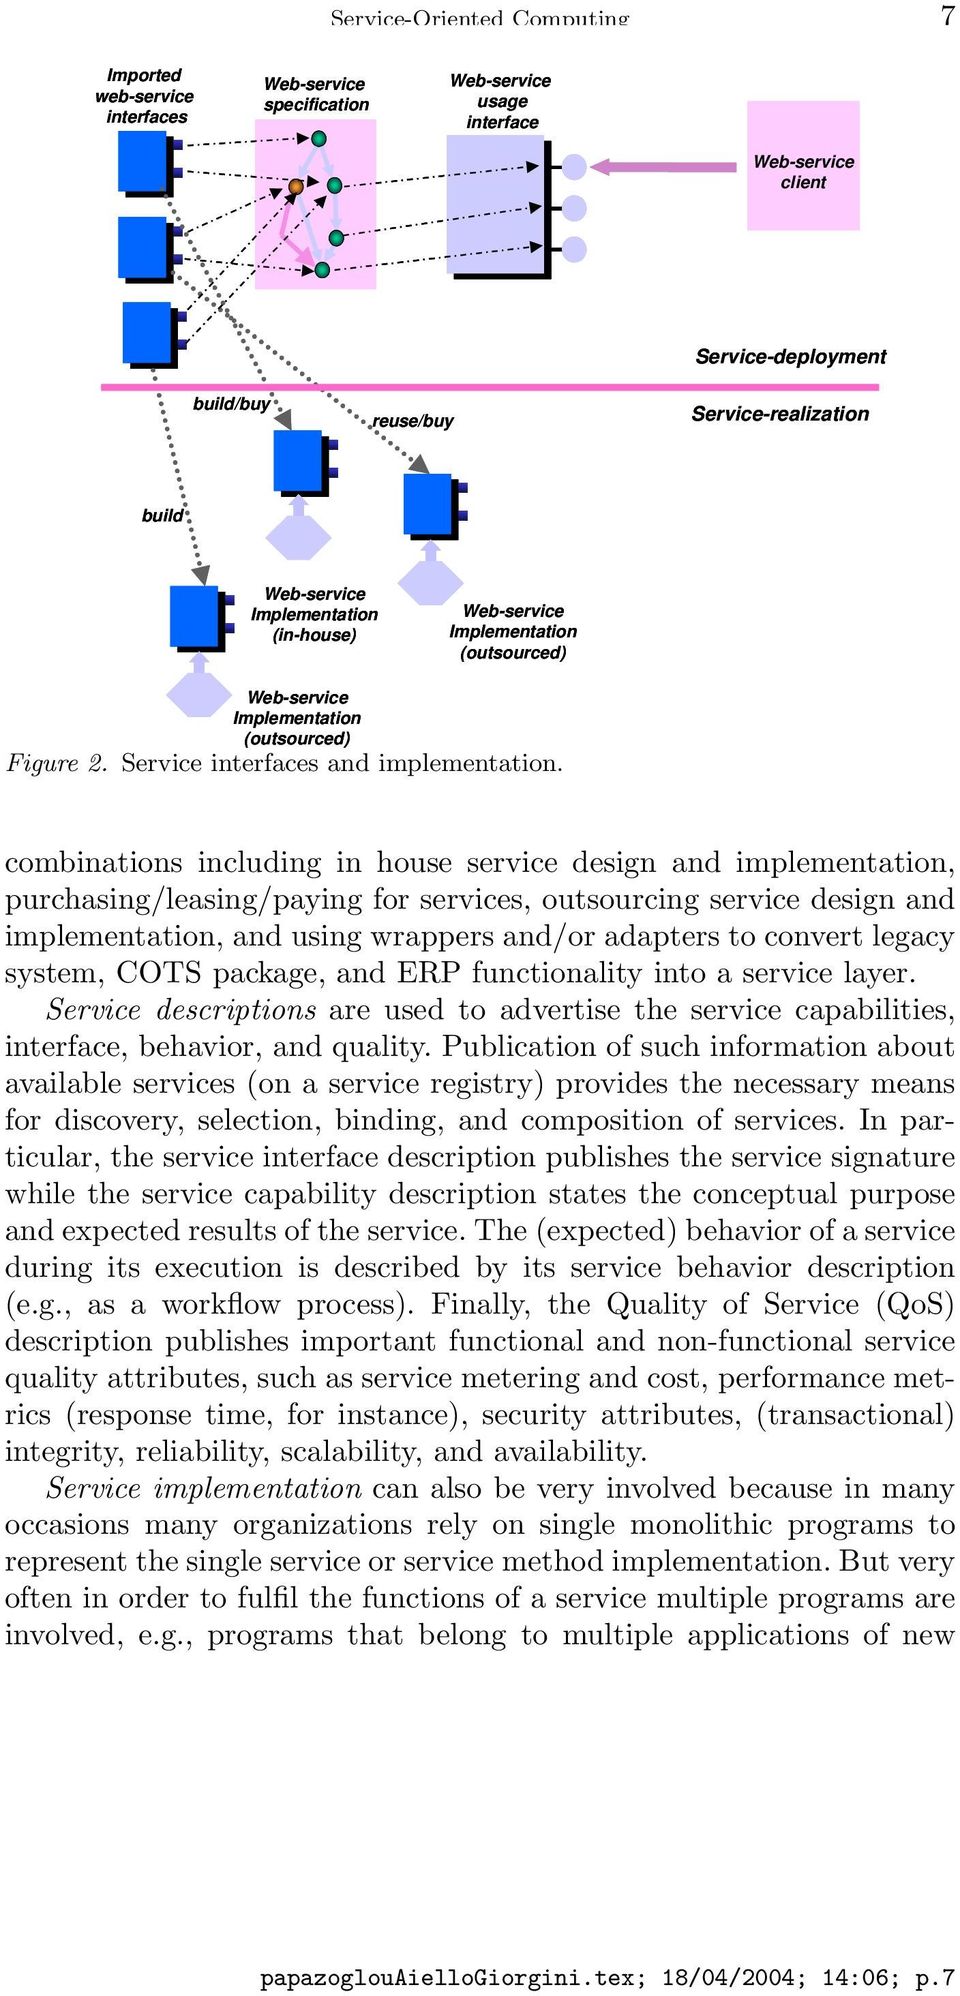 combinations including in house service design and implementation, purchasing/leasing/paying for services, outsourcing service design and implementation, and using wrappers and/or adapters to convert